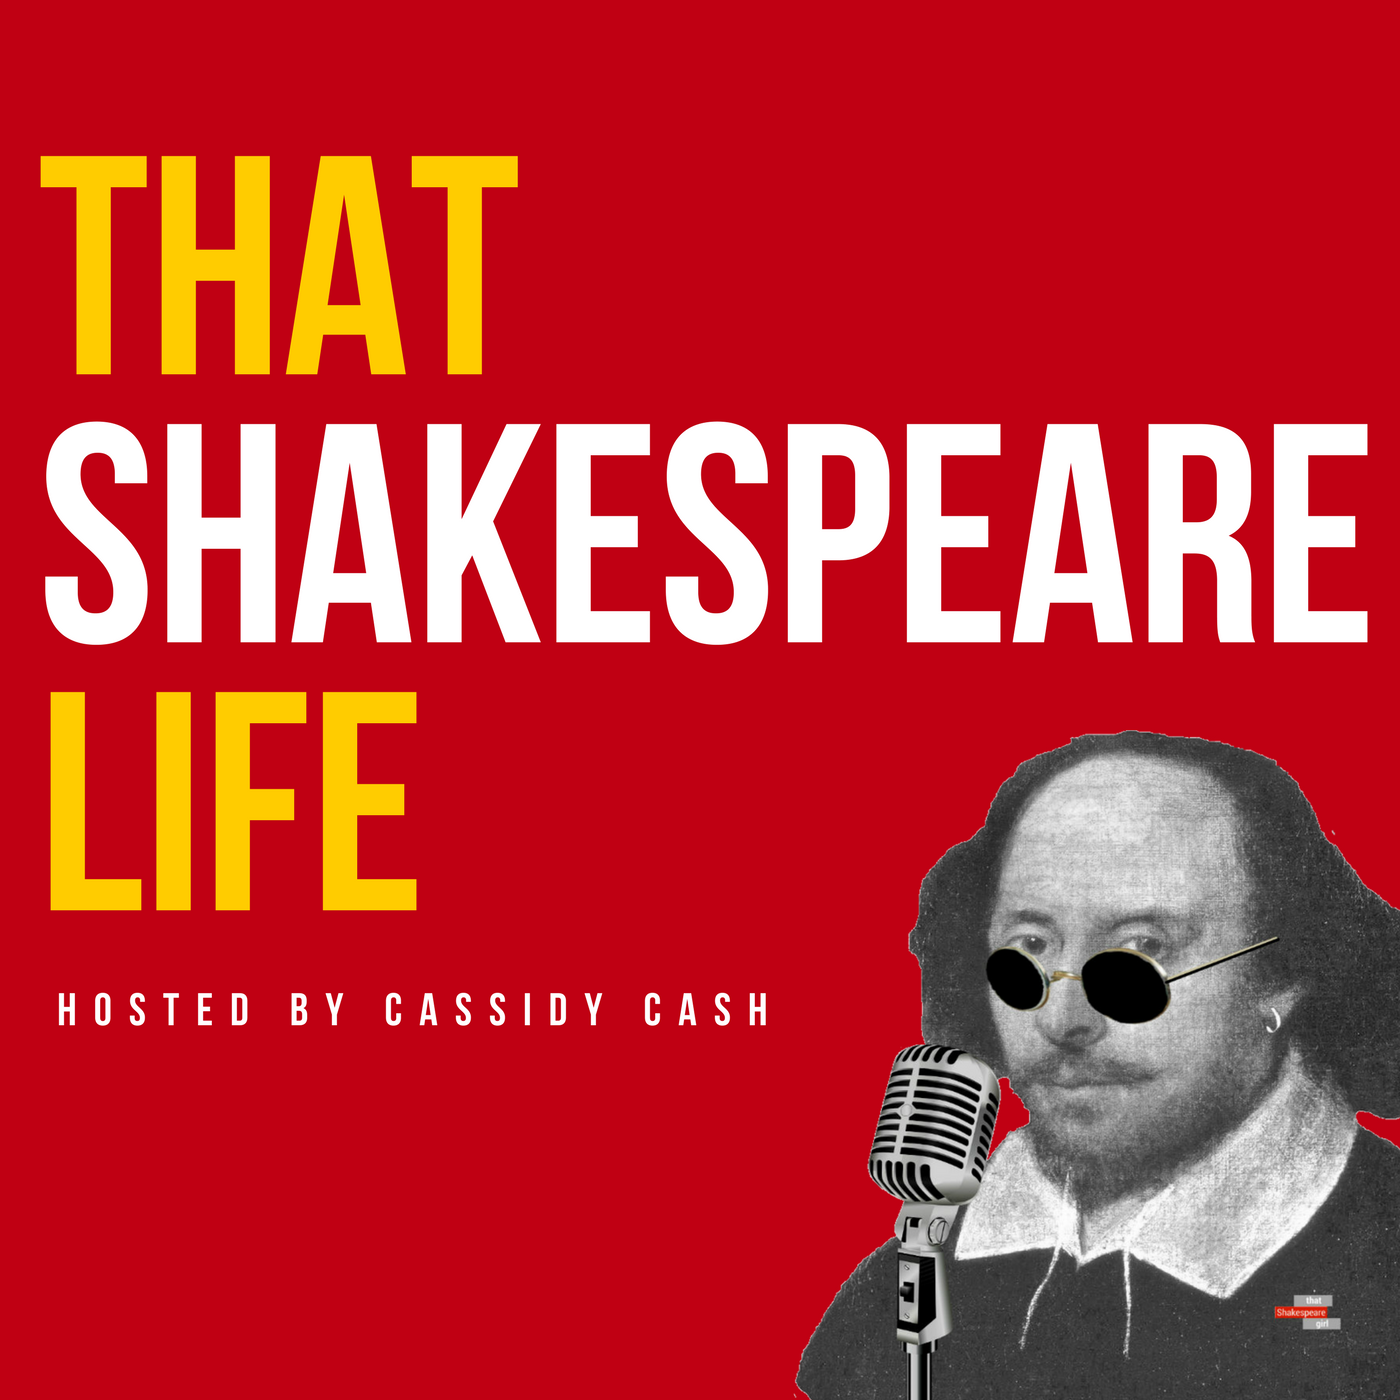 Podcast logo and image of WIlliam Shakespeare. 